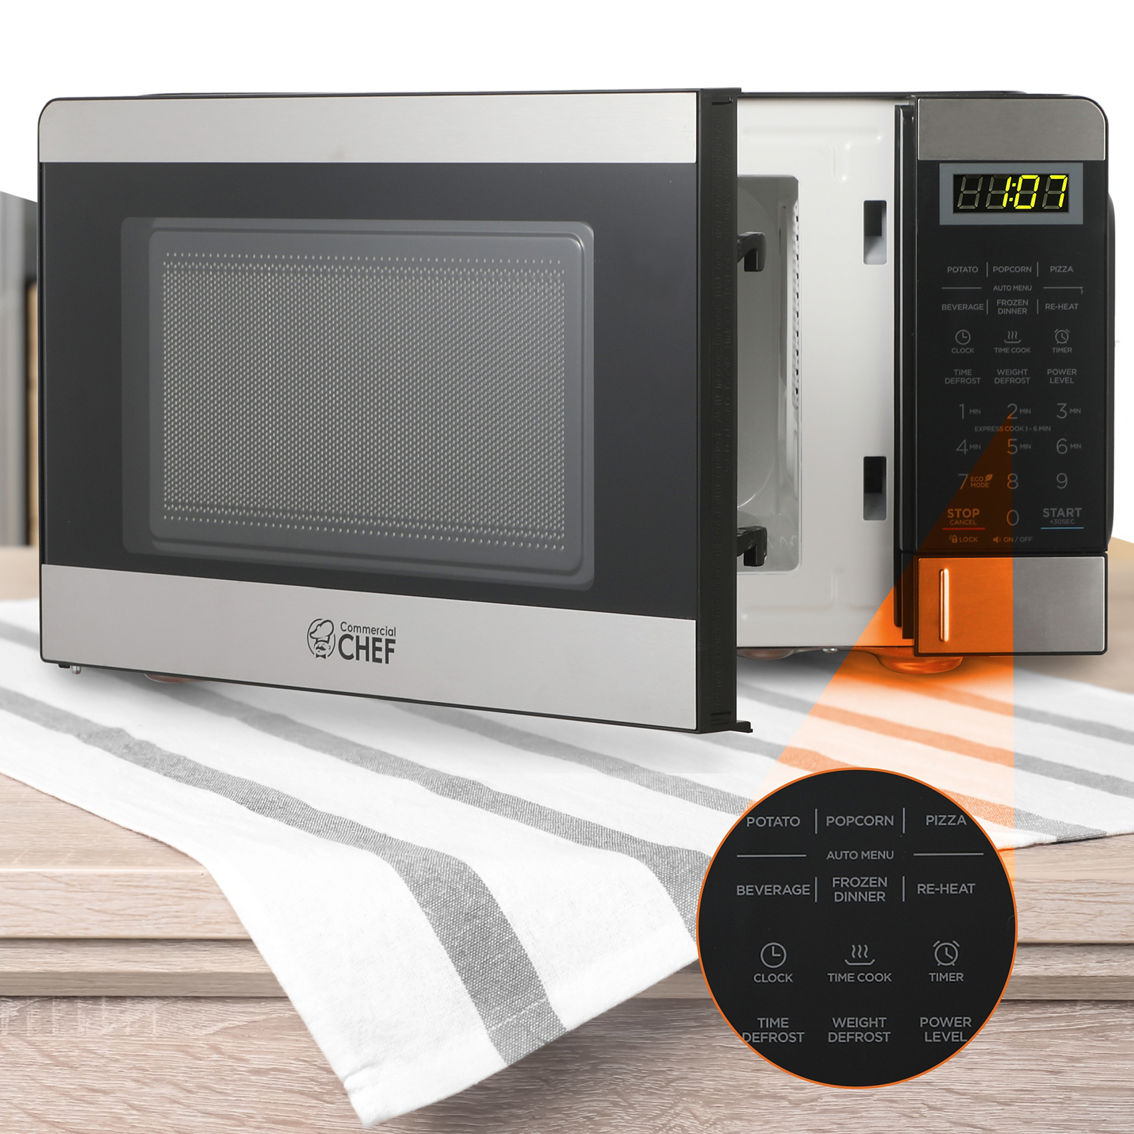 Commercial Chef .7 cu. ft. Counter Top Microwave - Image 3 of 7